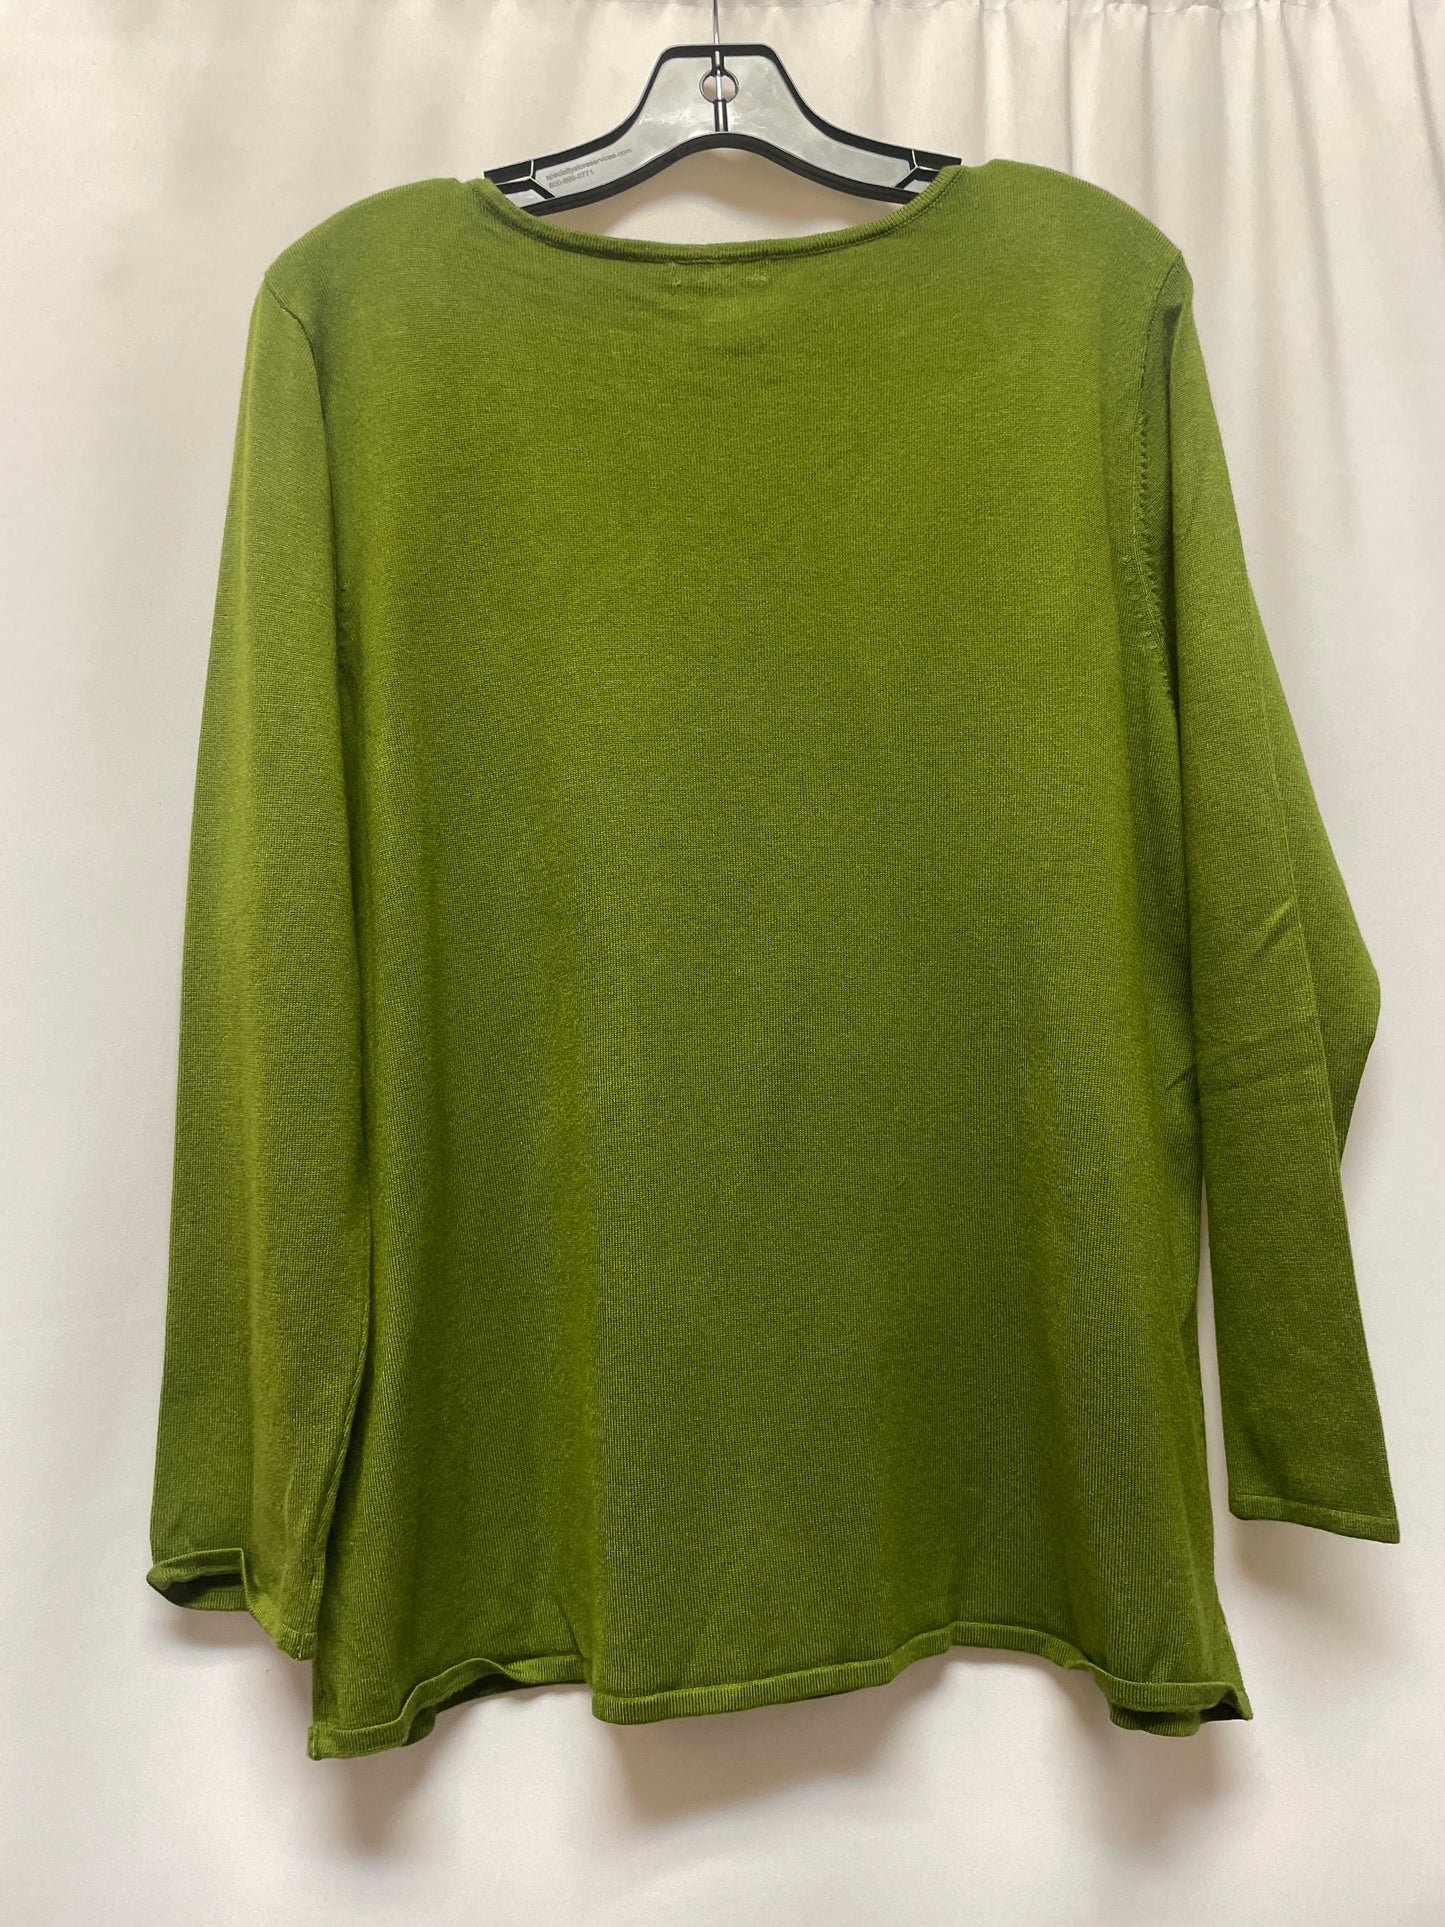 Green Top Long Sleeve Cato, Size 1x